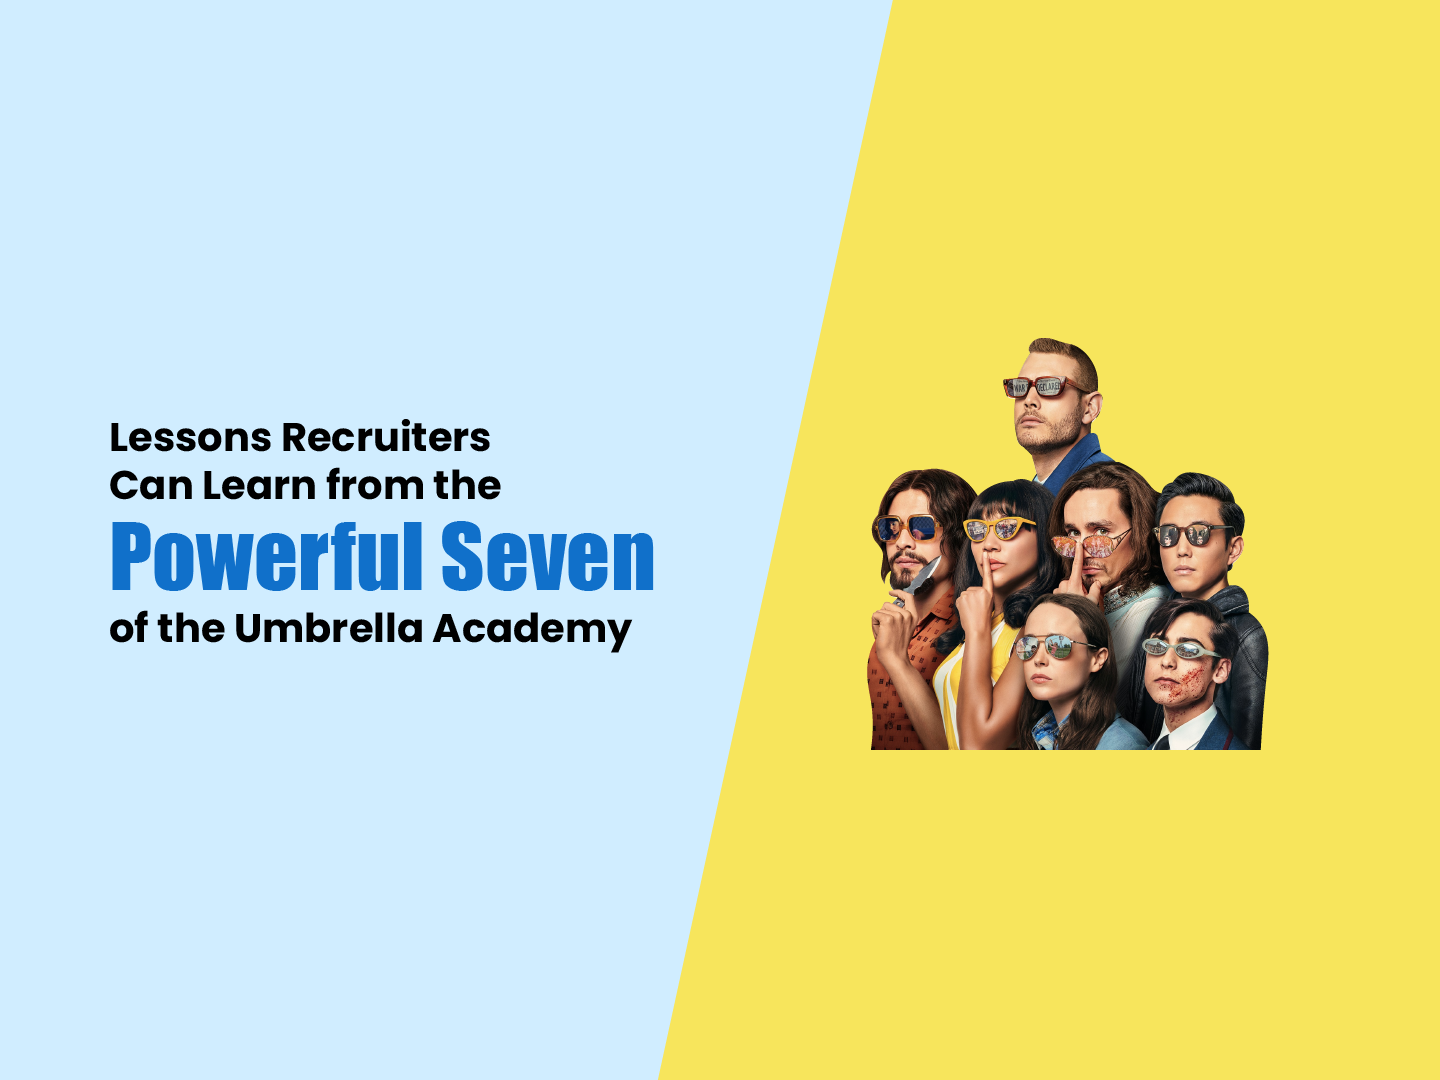 Recruiting lessons from Umbrella Academy